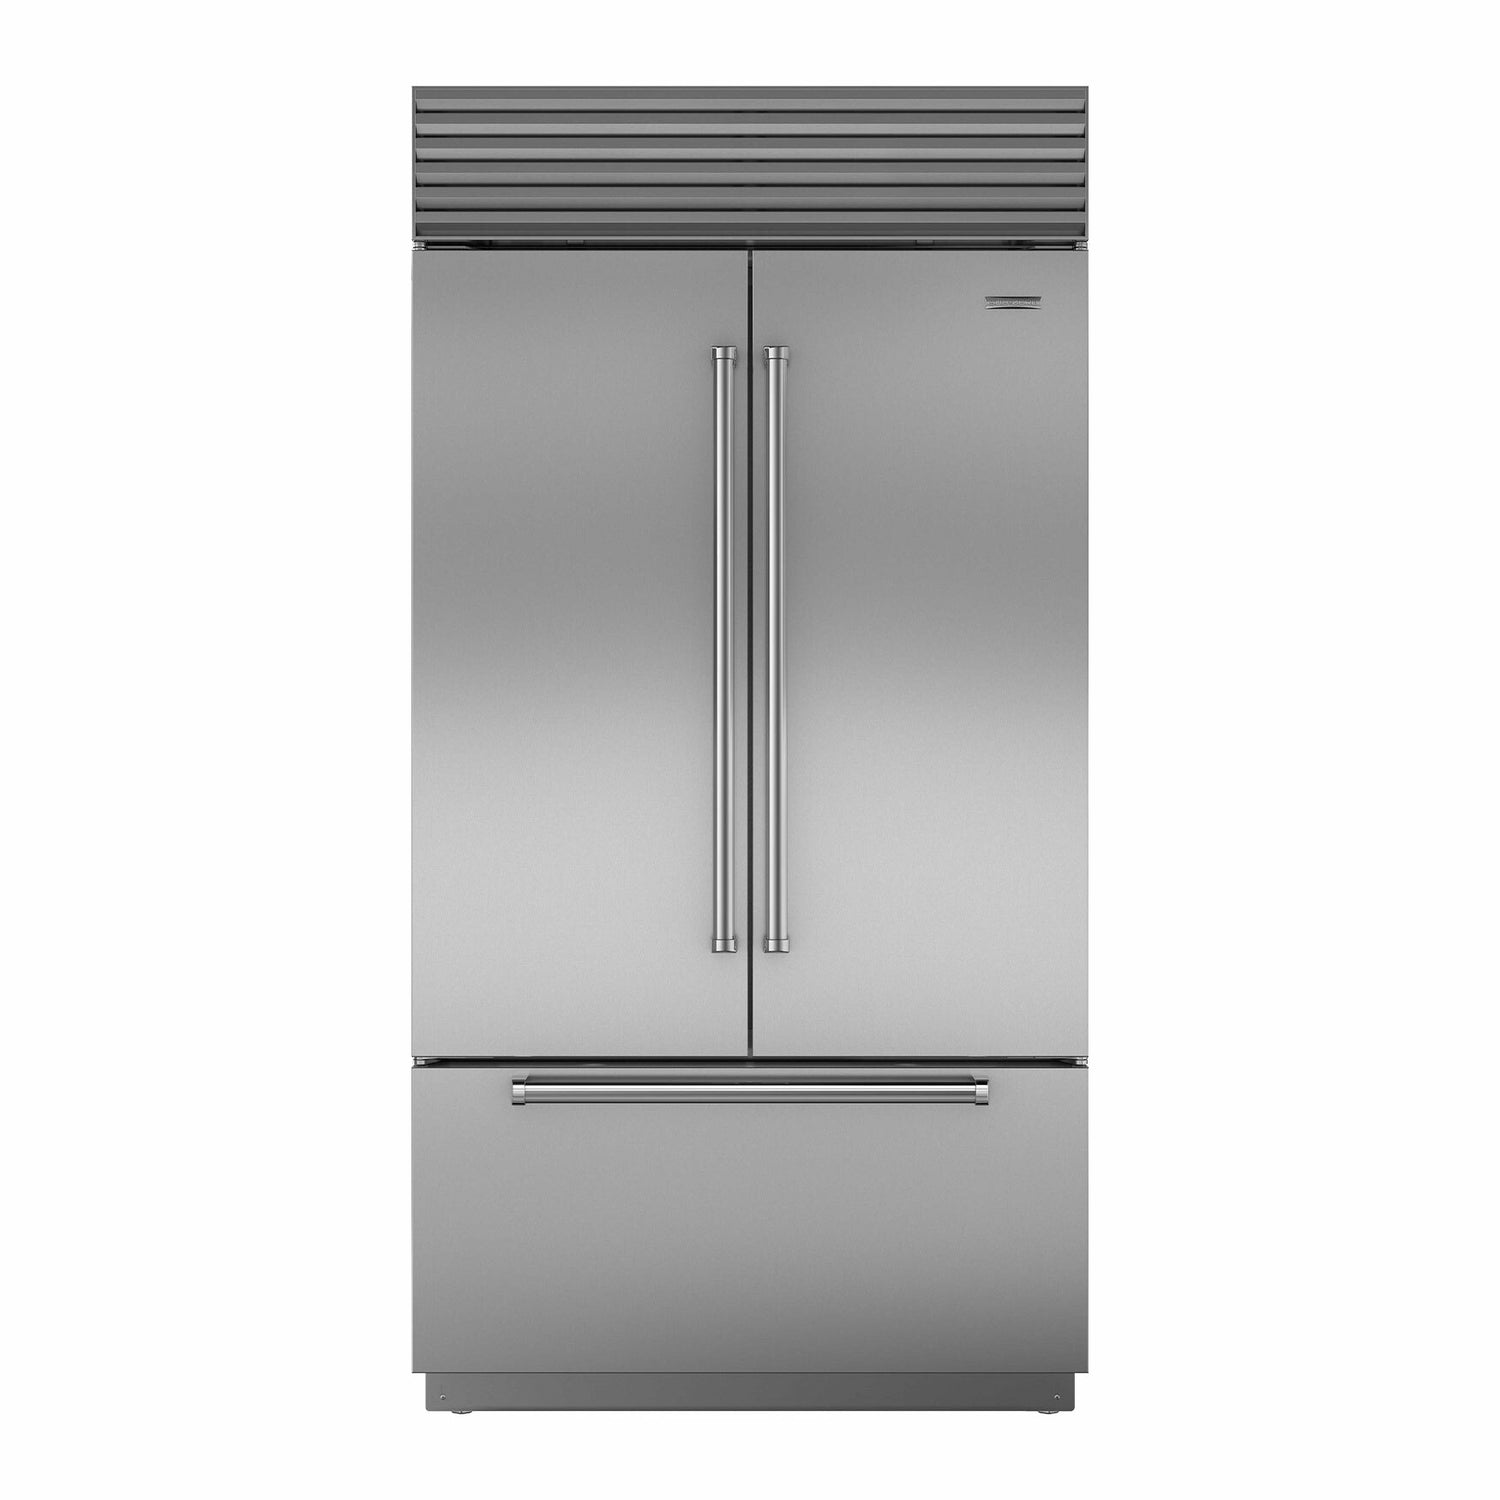 Sub-Zero Built-in Over-and-Under Refrigerator/Freezer with French Door - 2134 x 1067mm